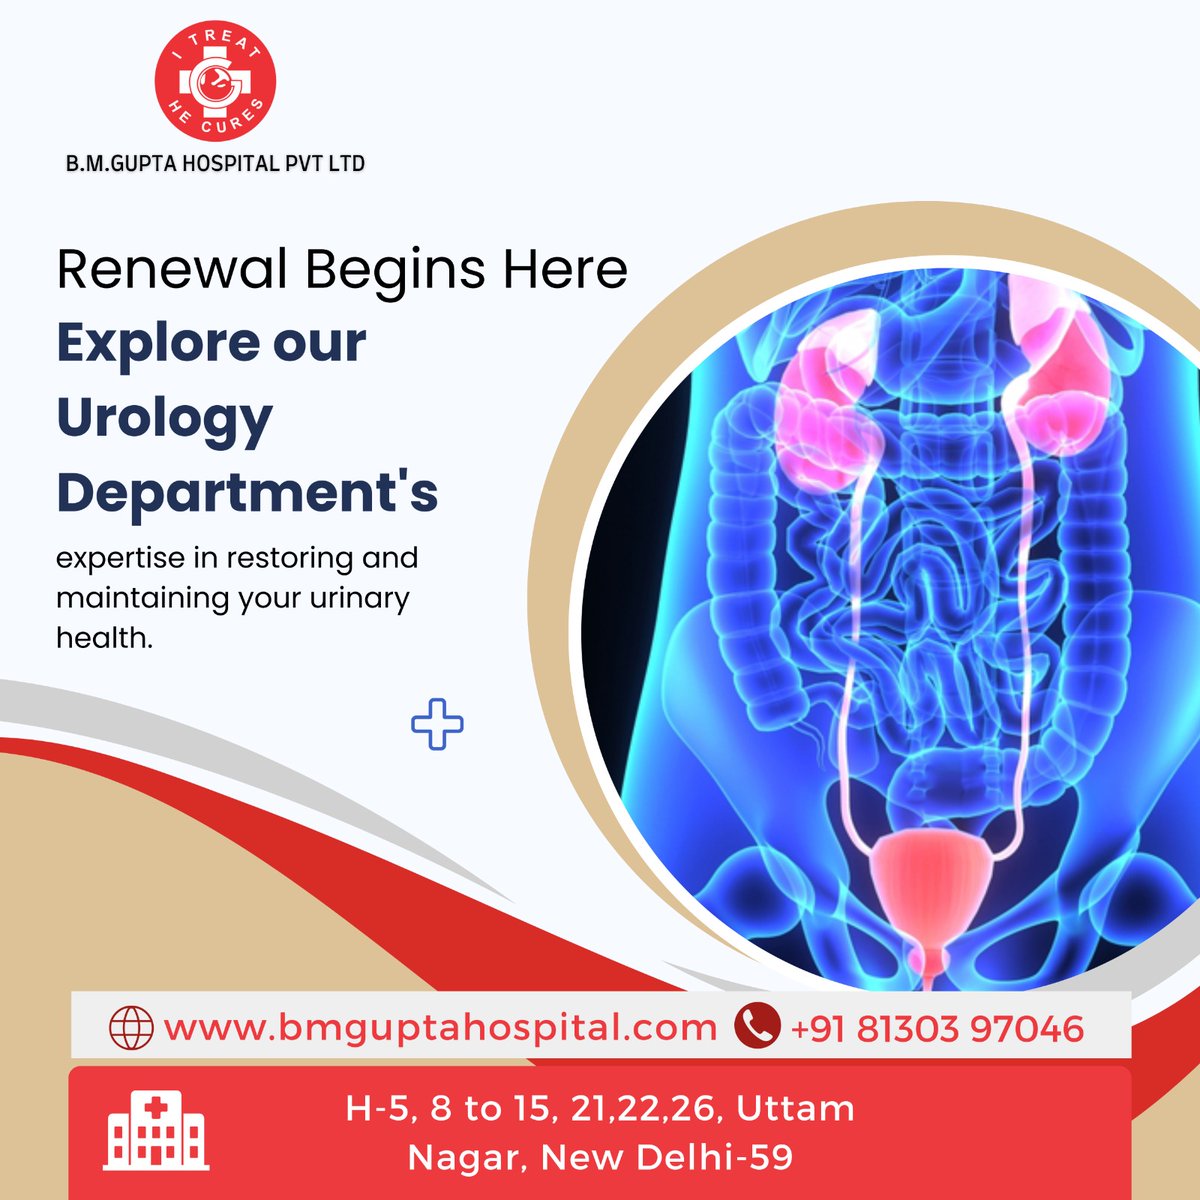 Renewal begins here! Our Urology Department offers expert care to restore and maintain your urinary health.
For more info 
Call us at  91 81303 97046
Mail us: bmguptagnh@gmail.com

#BMGH #BMGuptaHospital #health #healthcare #urology #urinaryhealth #prostate #bladder #kidney